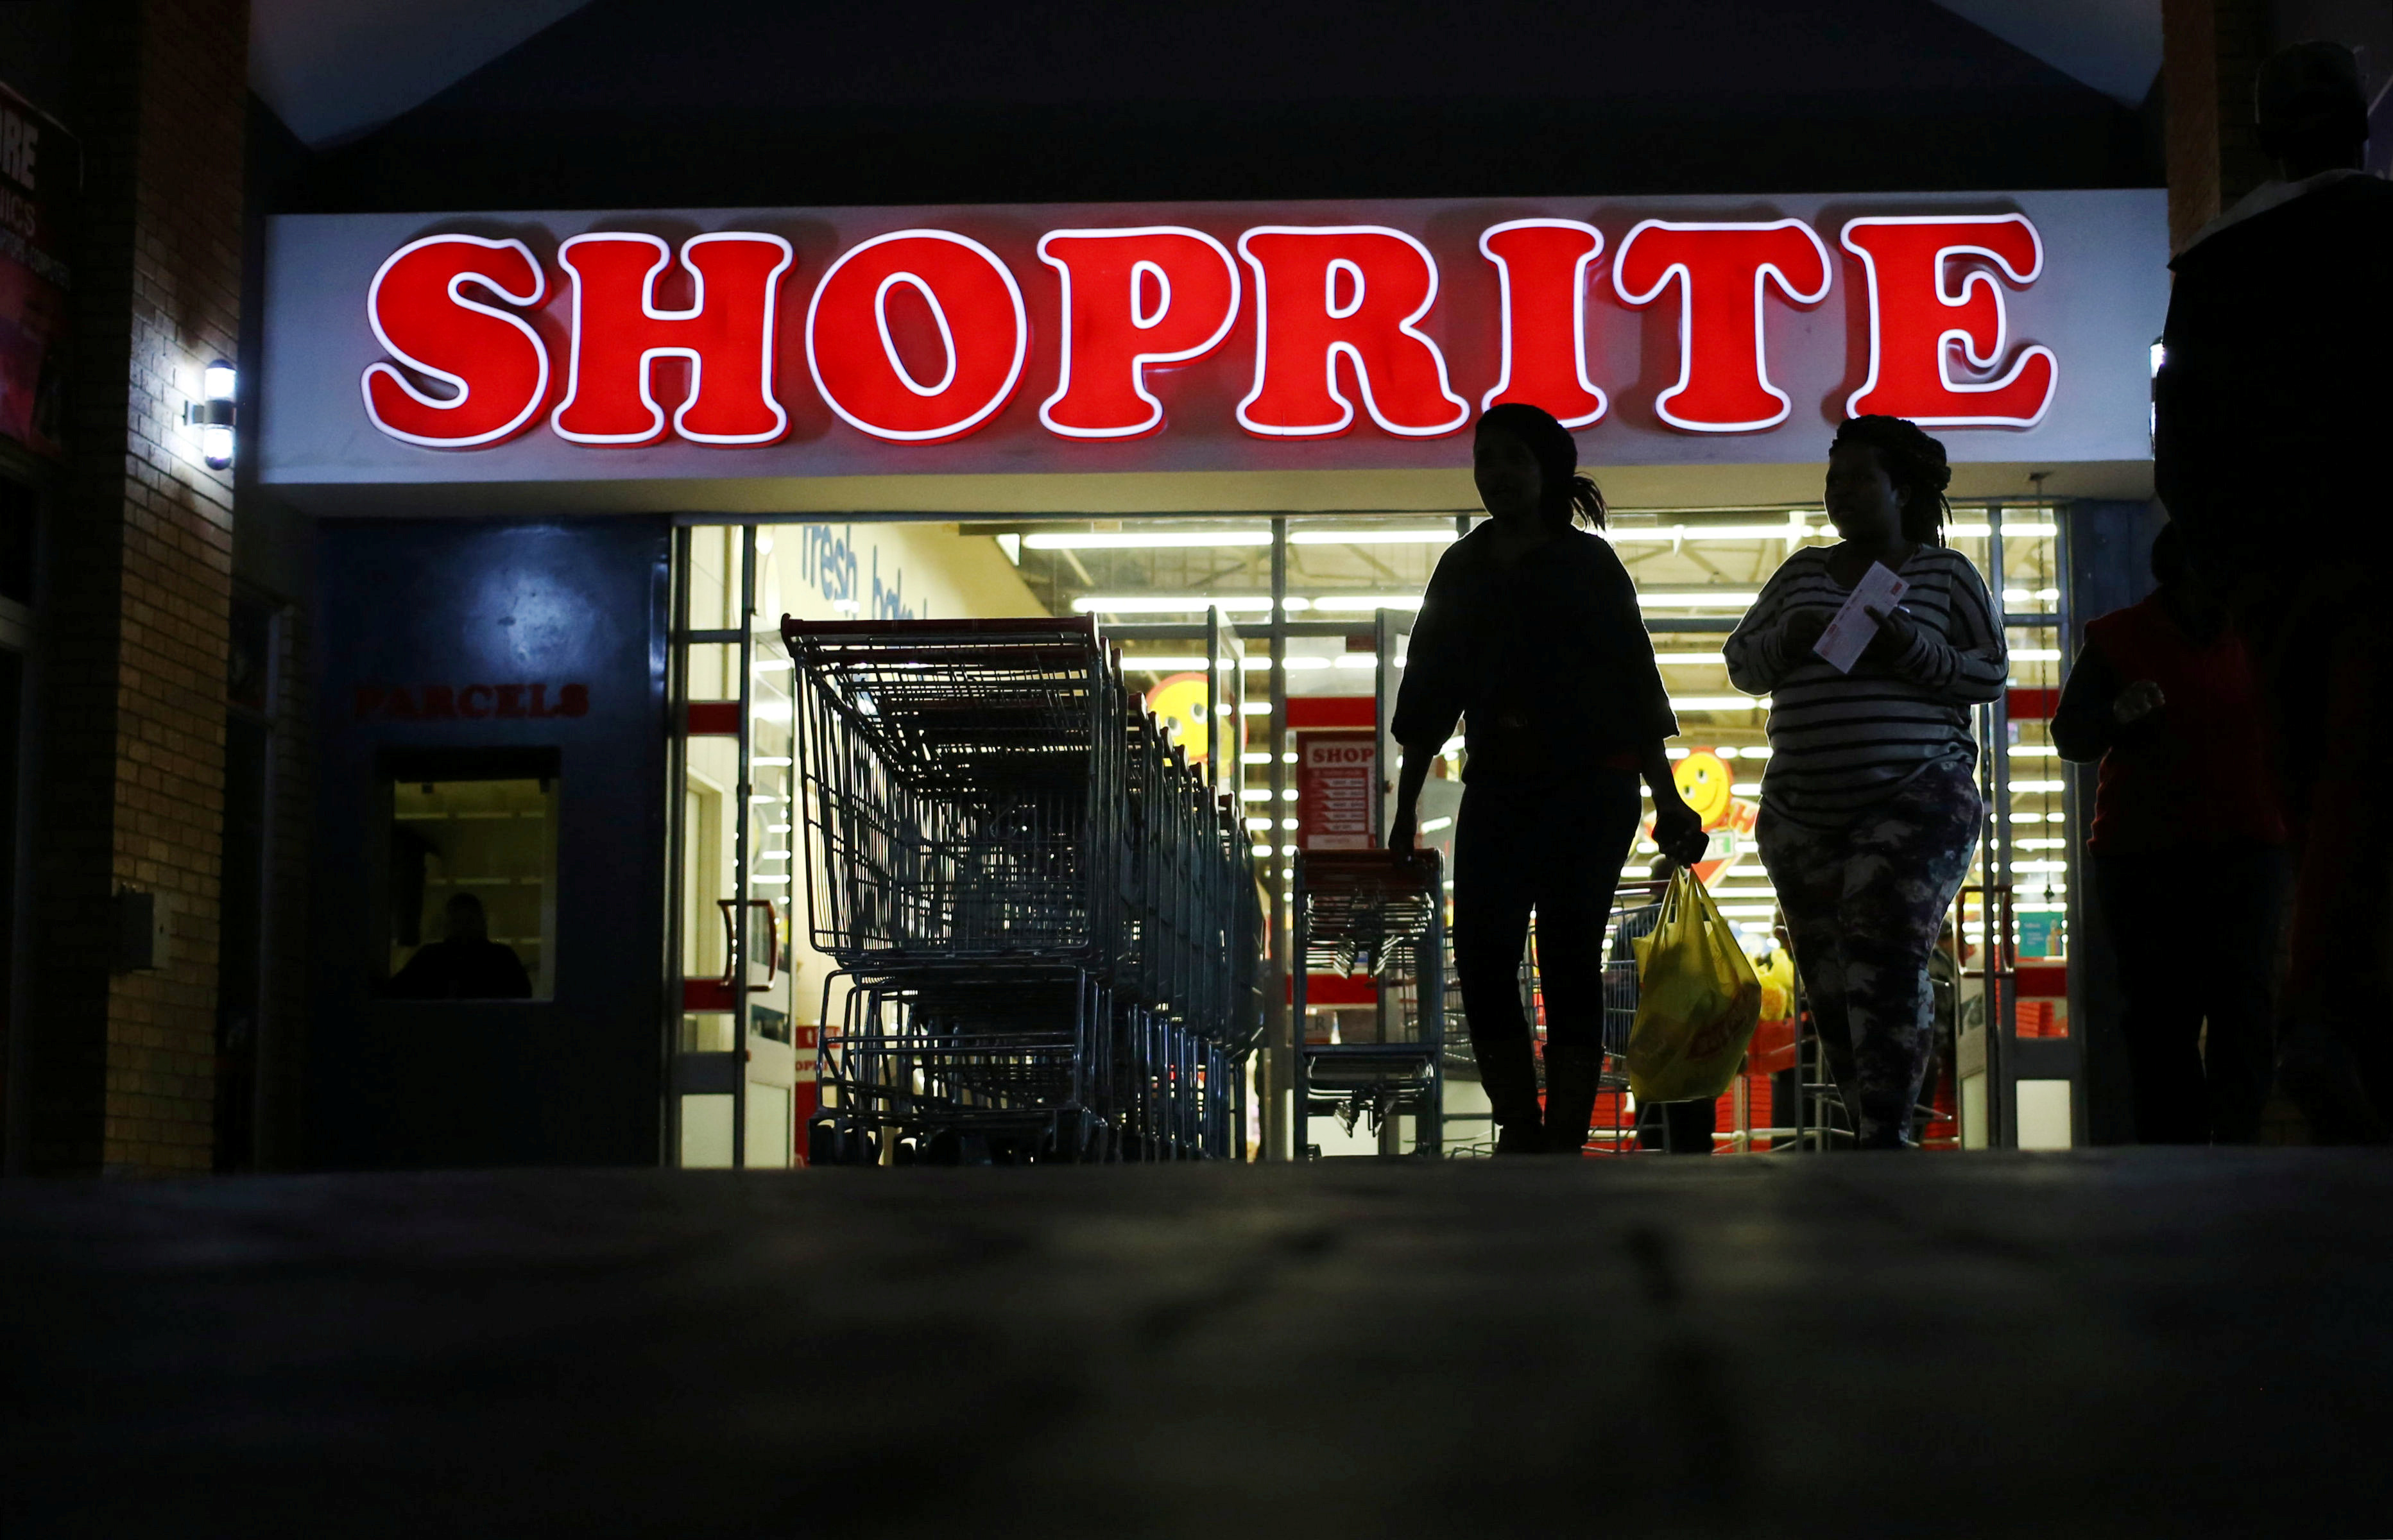 Shoppers leave the Shoprite store in Daveyton